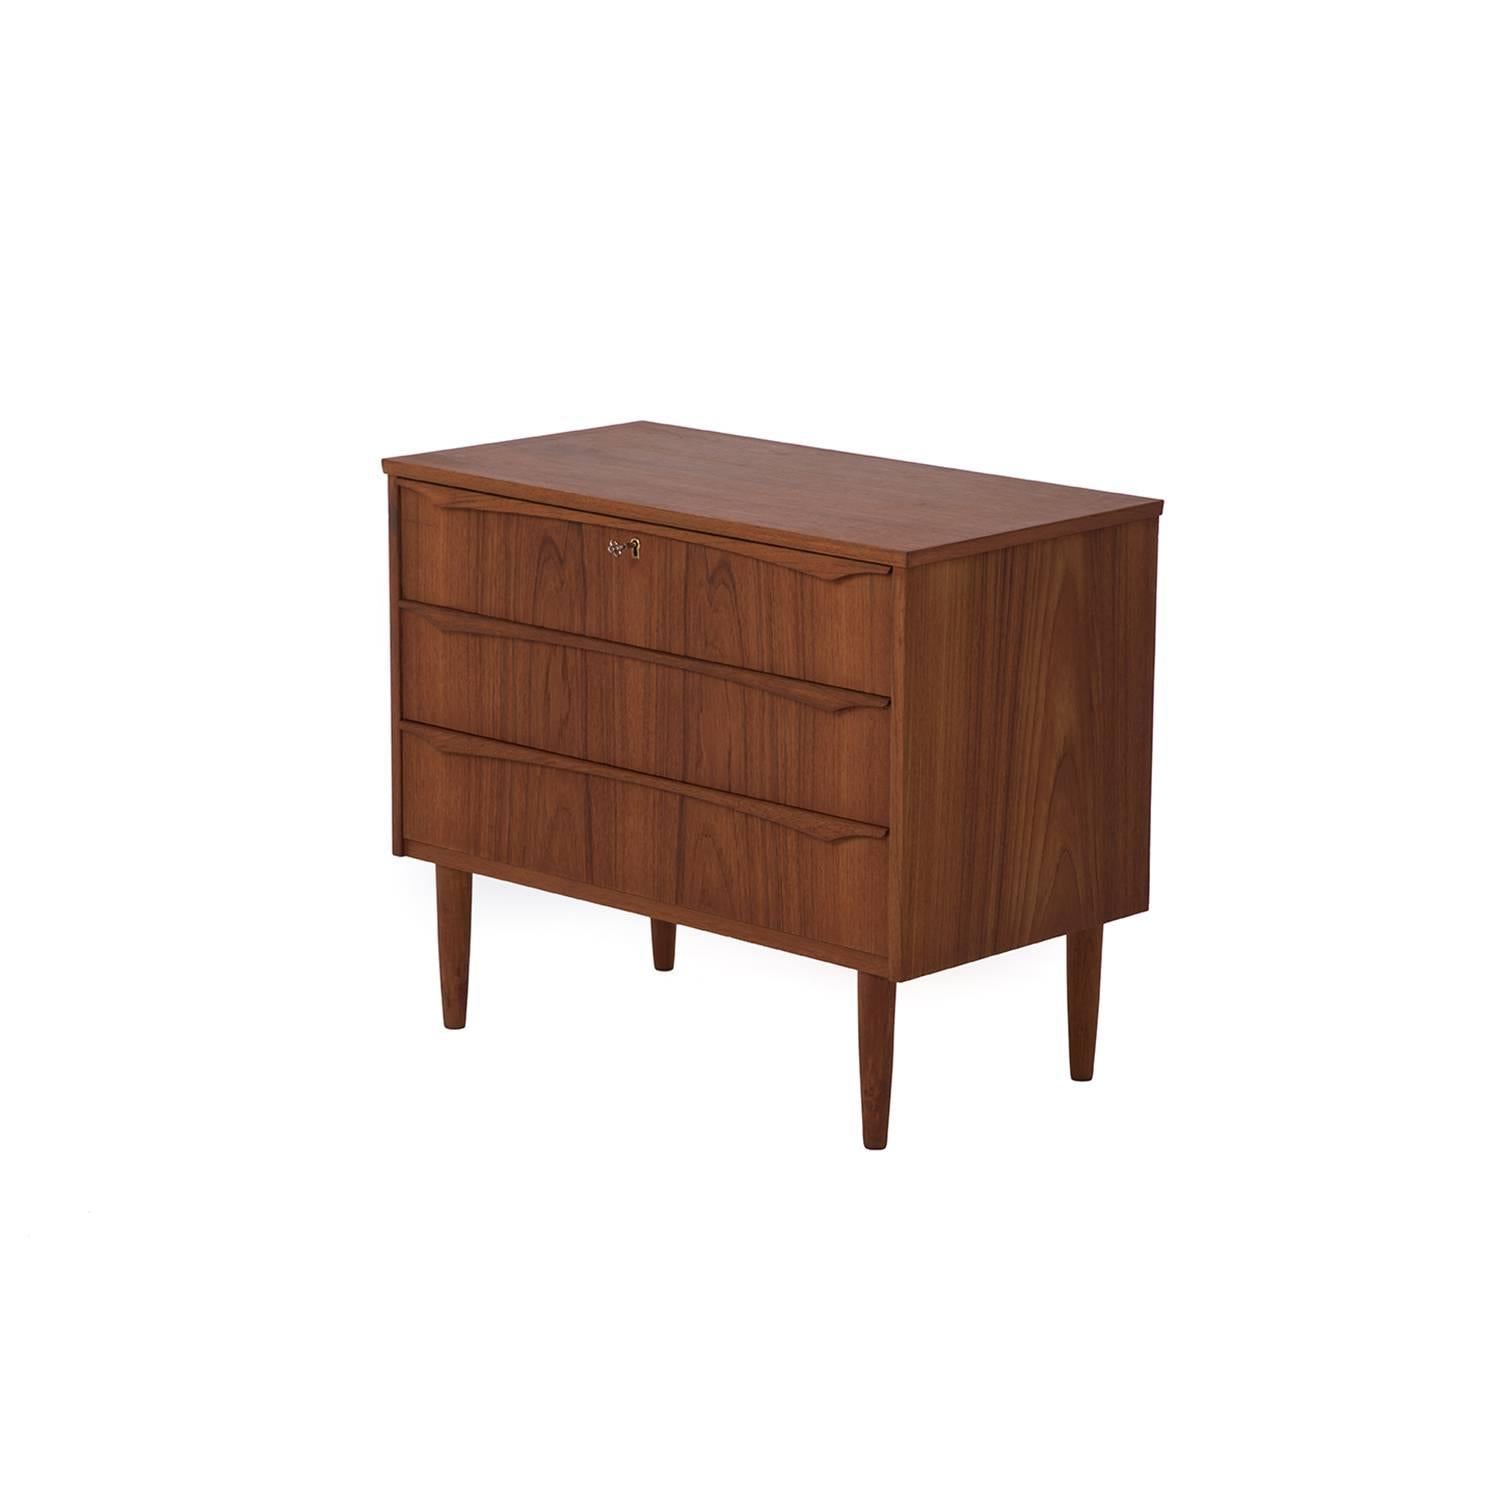 This Danish Modern original occasional drawer chest is made from beautiful old growth teak and hand finished in oil. An excellent accent piece for any room. Three drawers, locking top drawer with original key. 

 